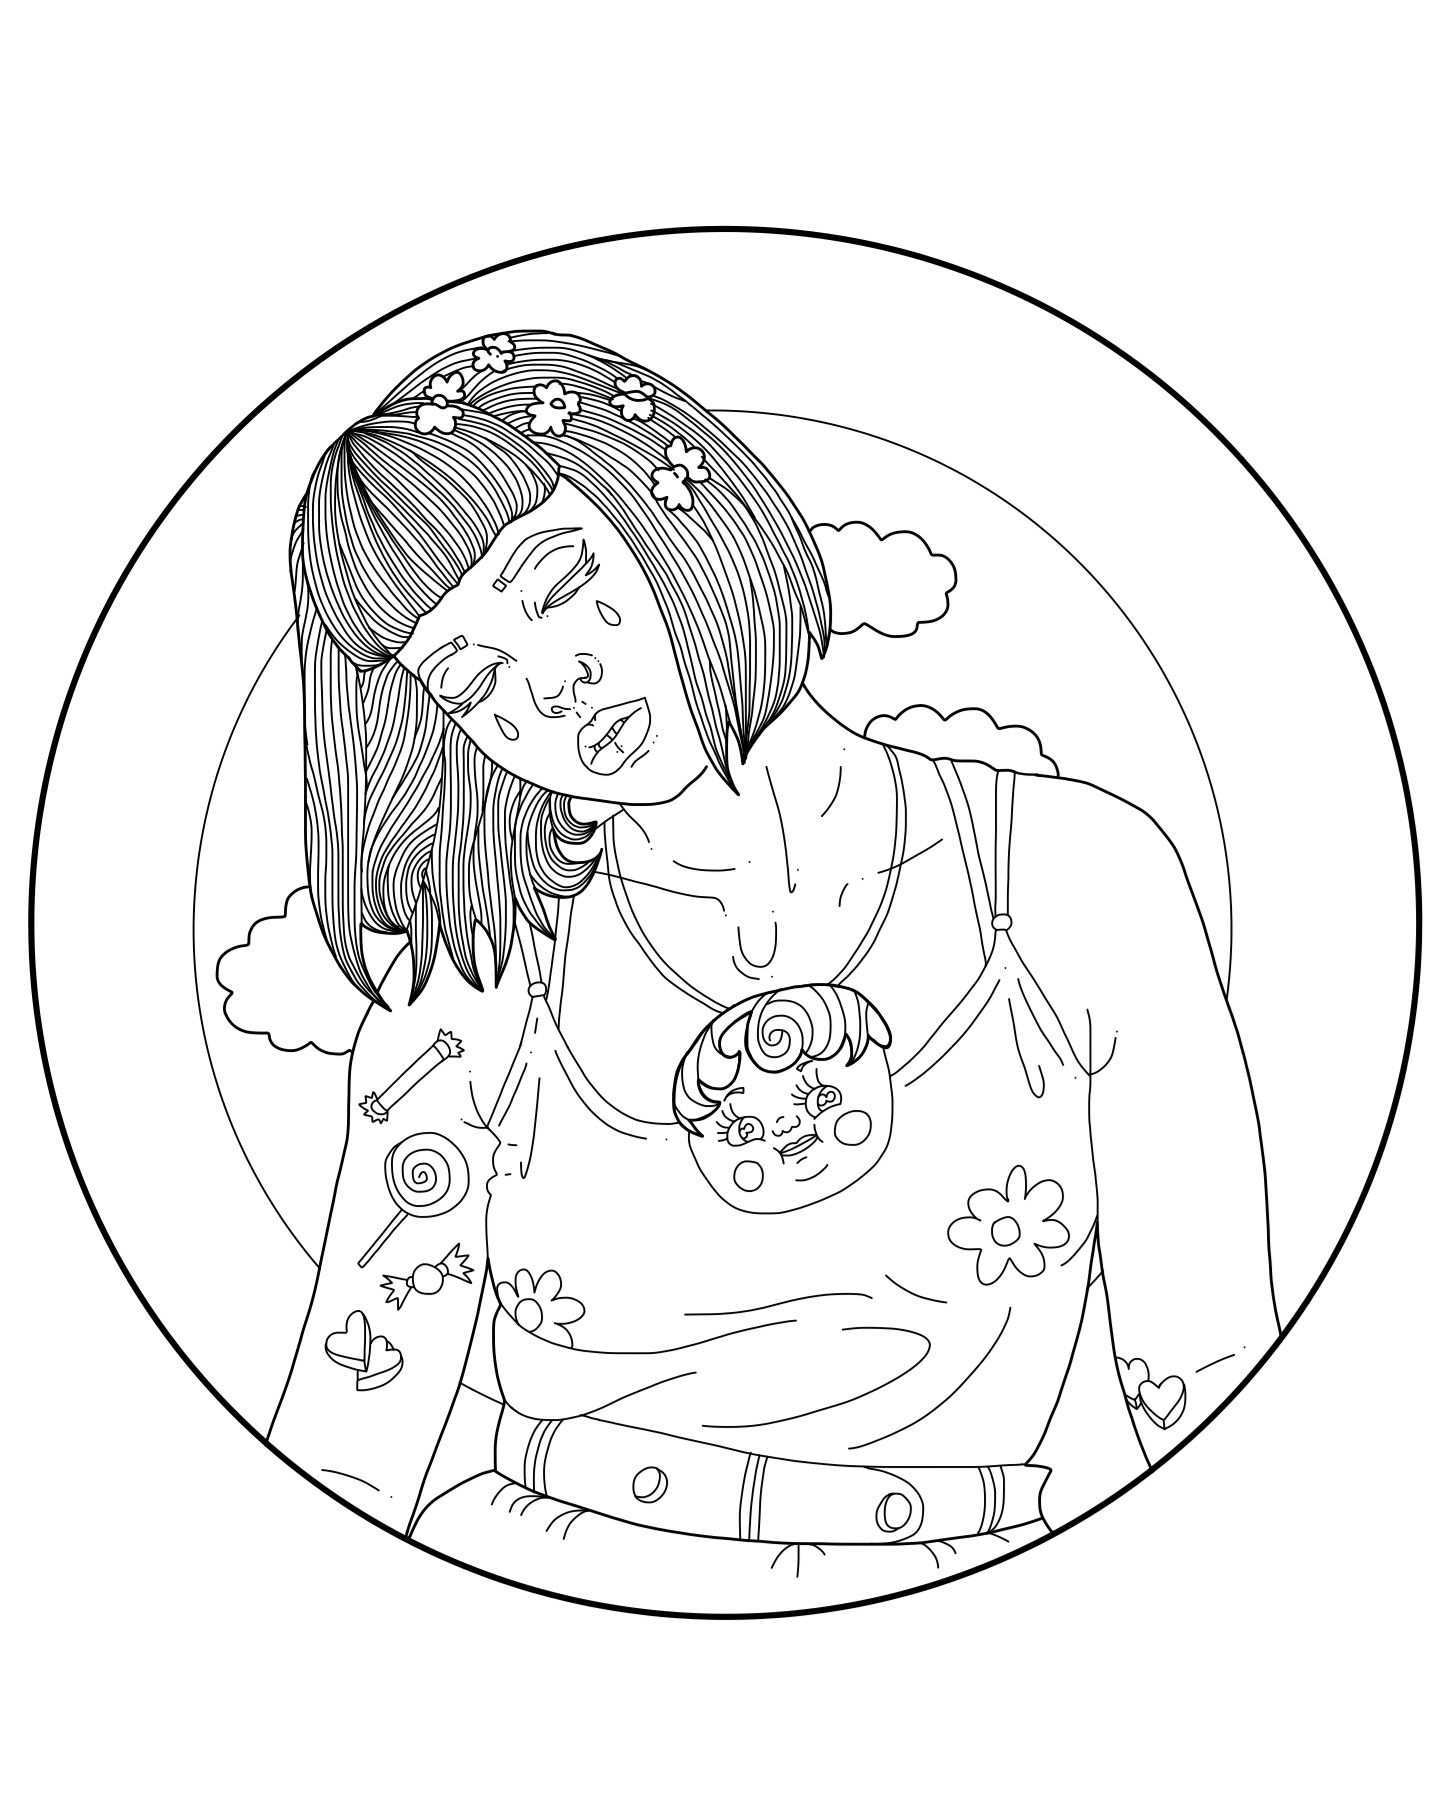 Melanie Martinez Coloring Pages Coloring Pages Melanie Martinez Coloring Book Millie